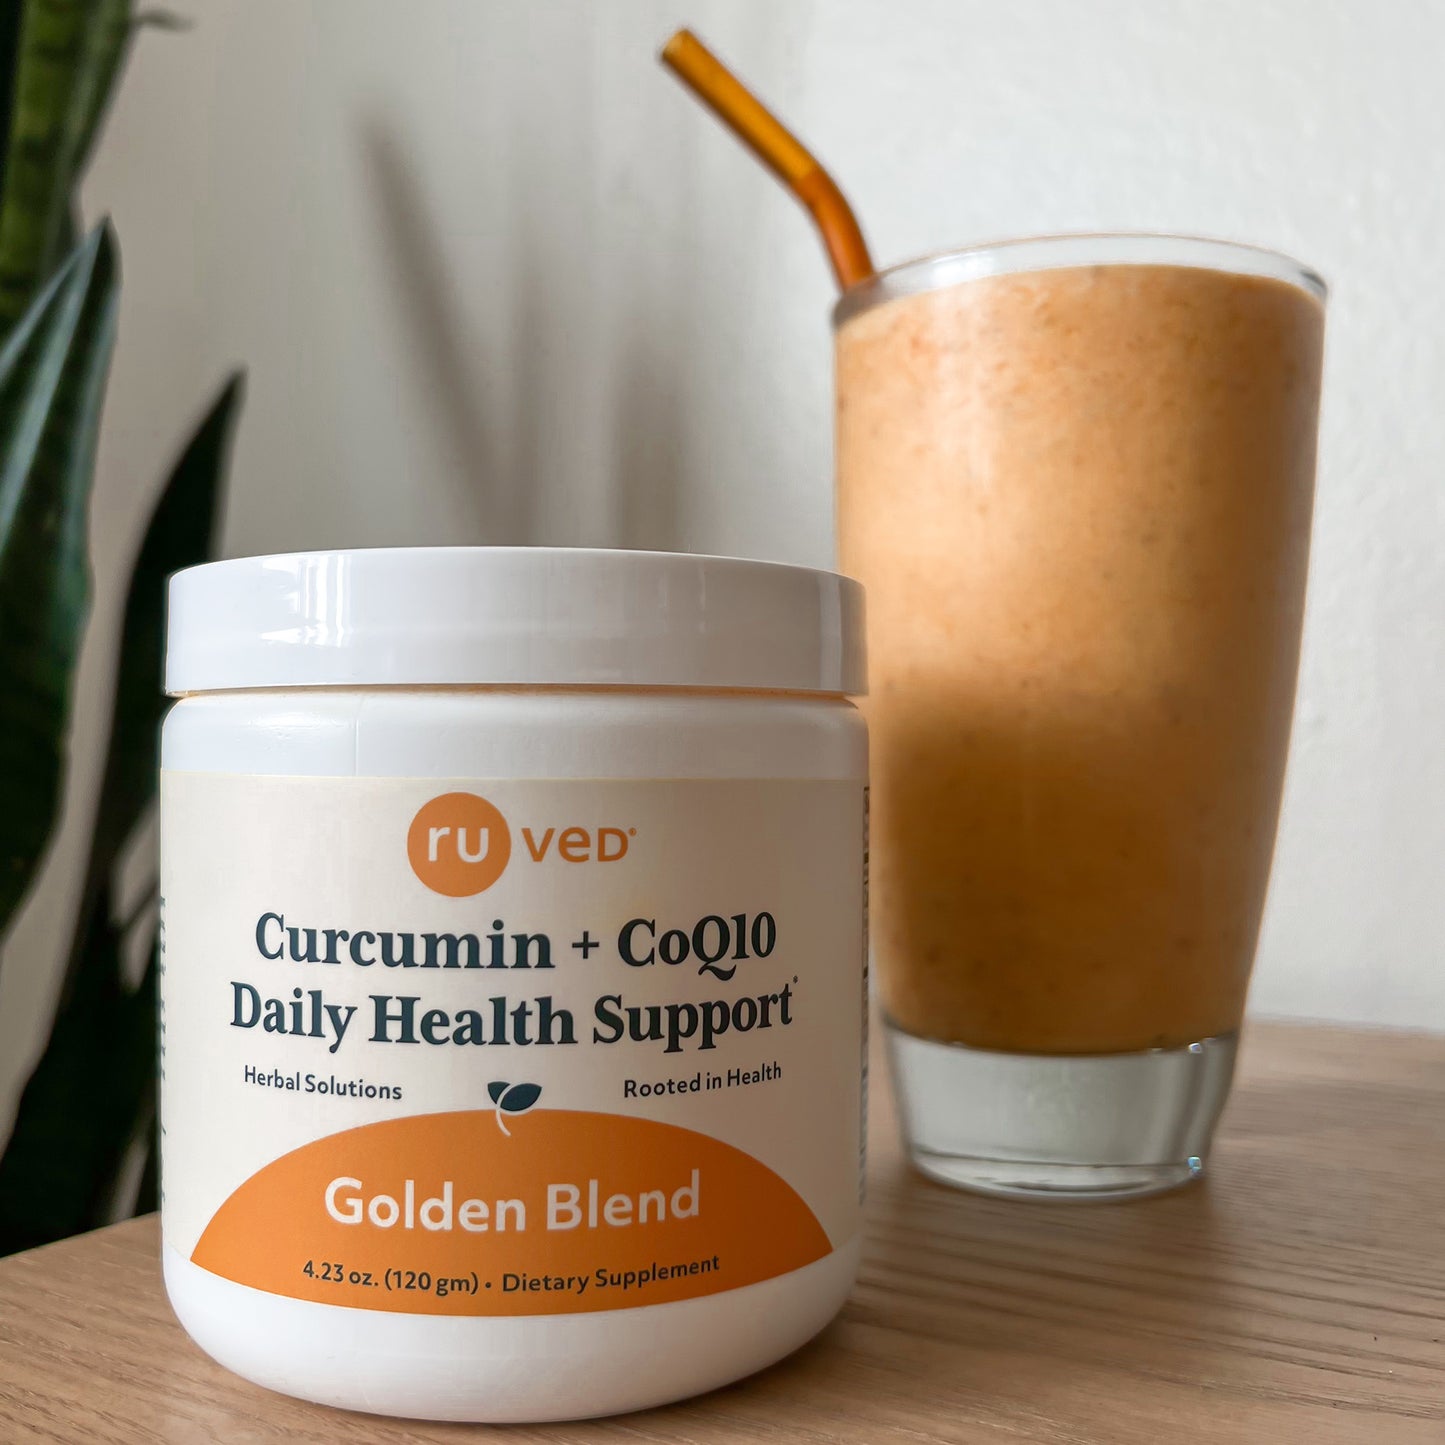 Glass jar of Cocurcumin beside a protein shake, highlighting health and wellness supplements.